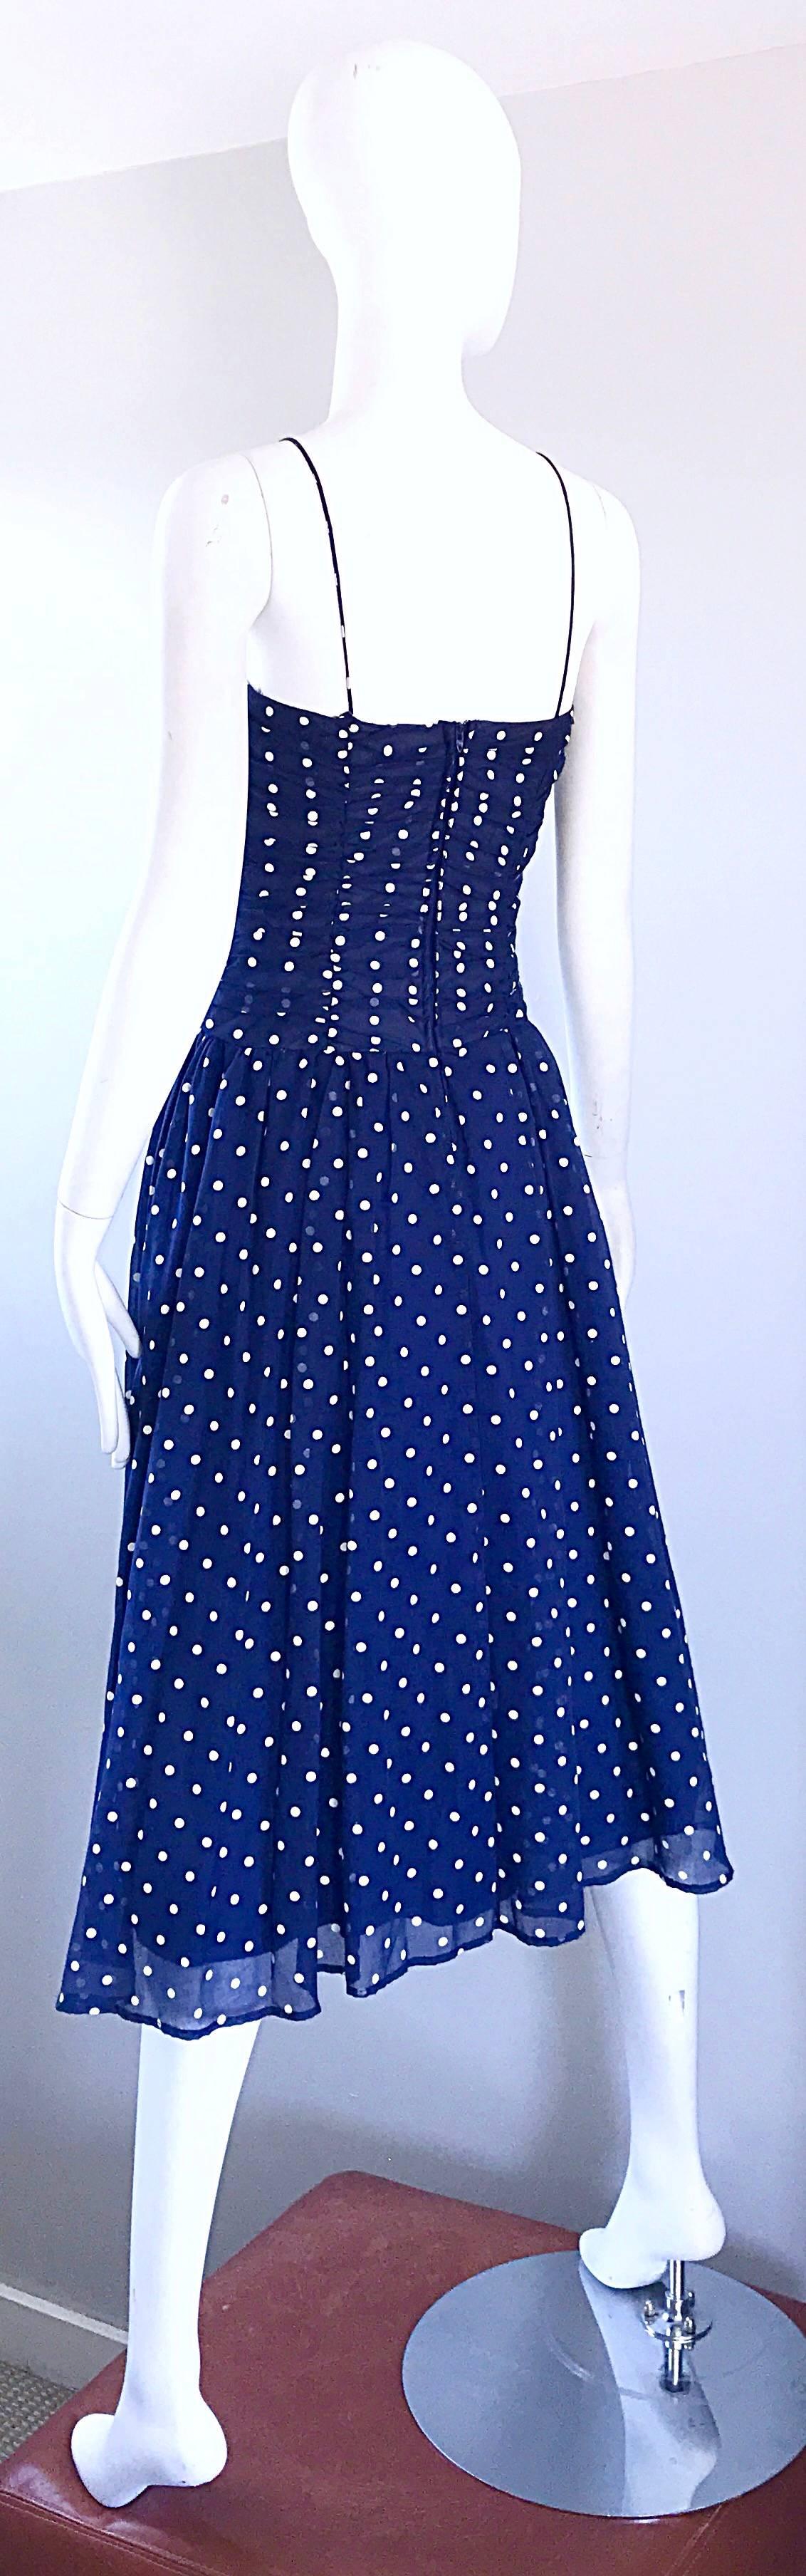 Women's Chic Vintage Navy Blue and White Hand Painted Polka Dot Sleeveless Ruched Dress For Sale